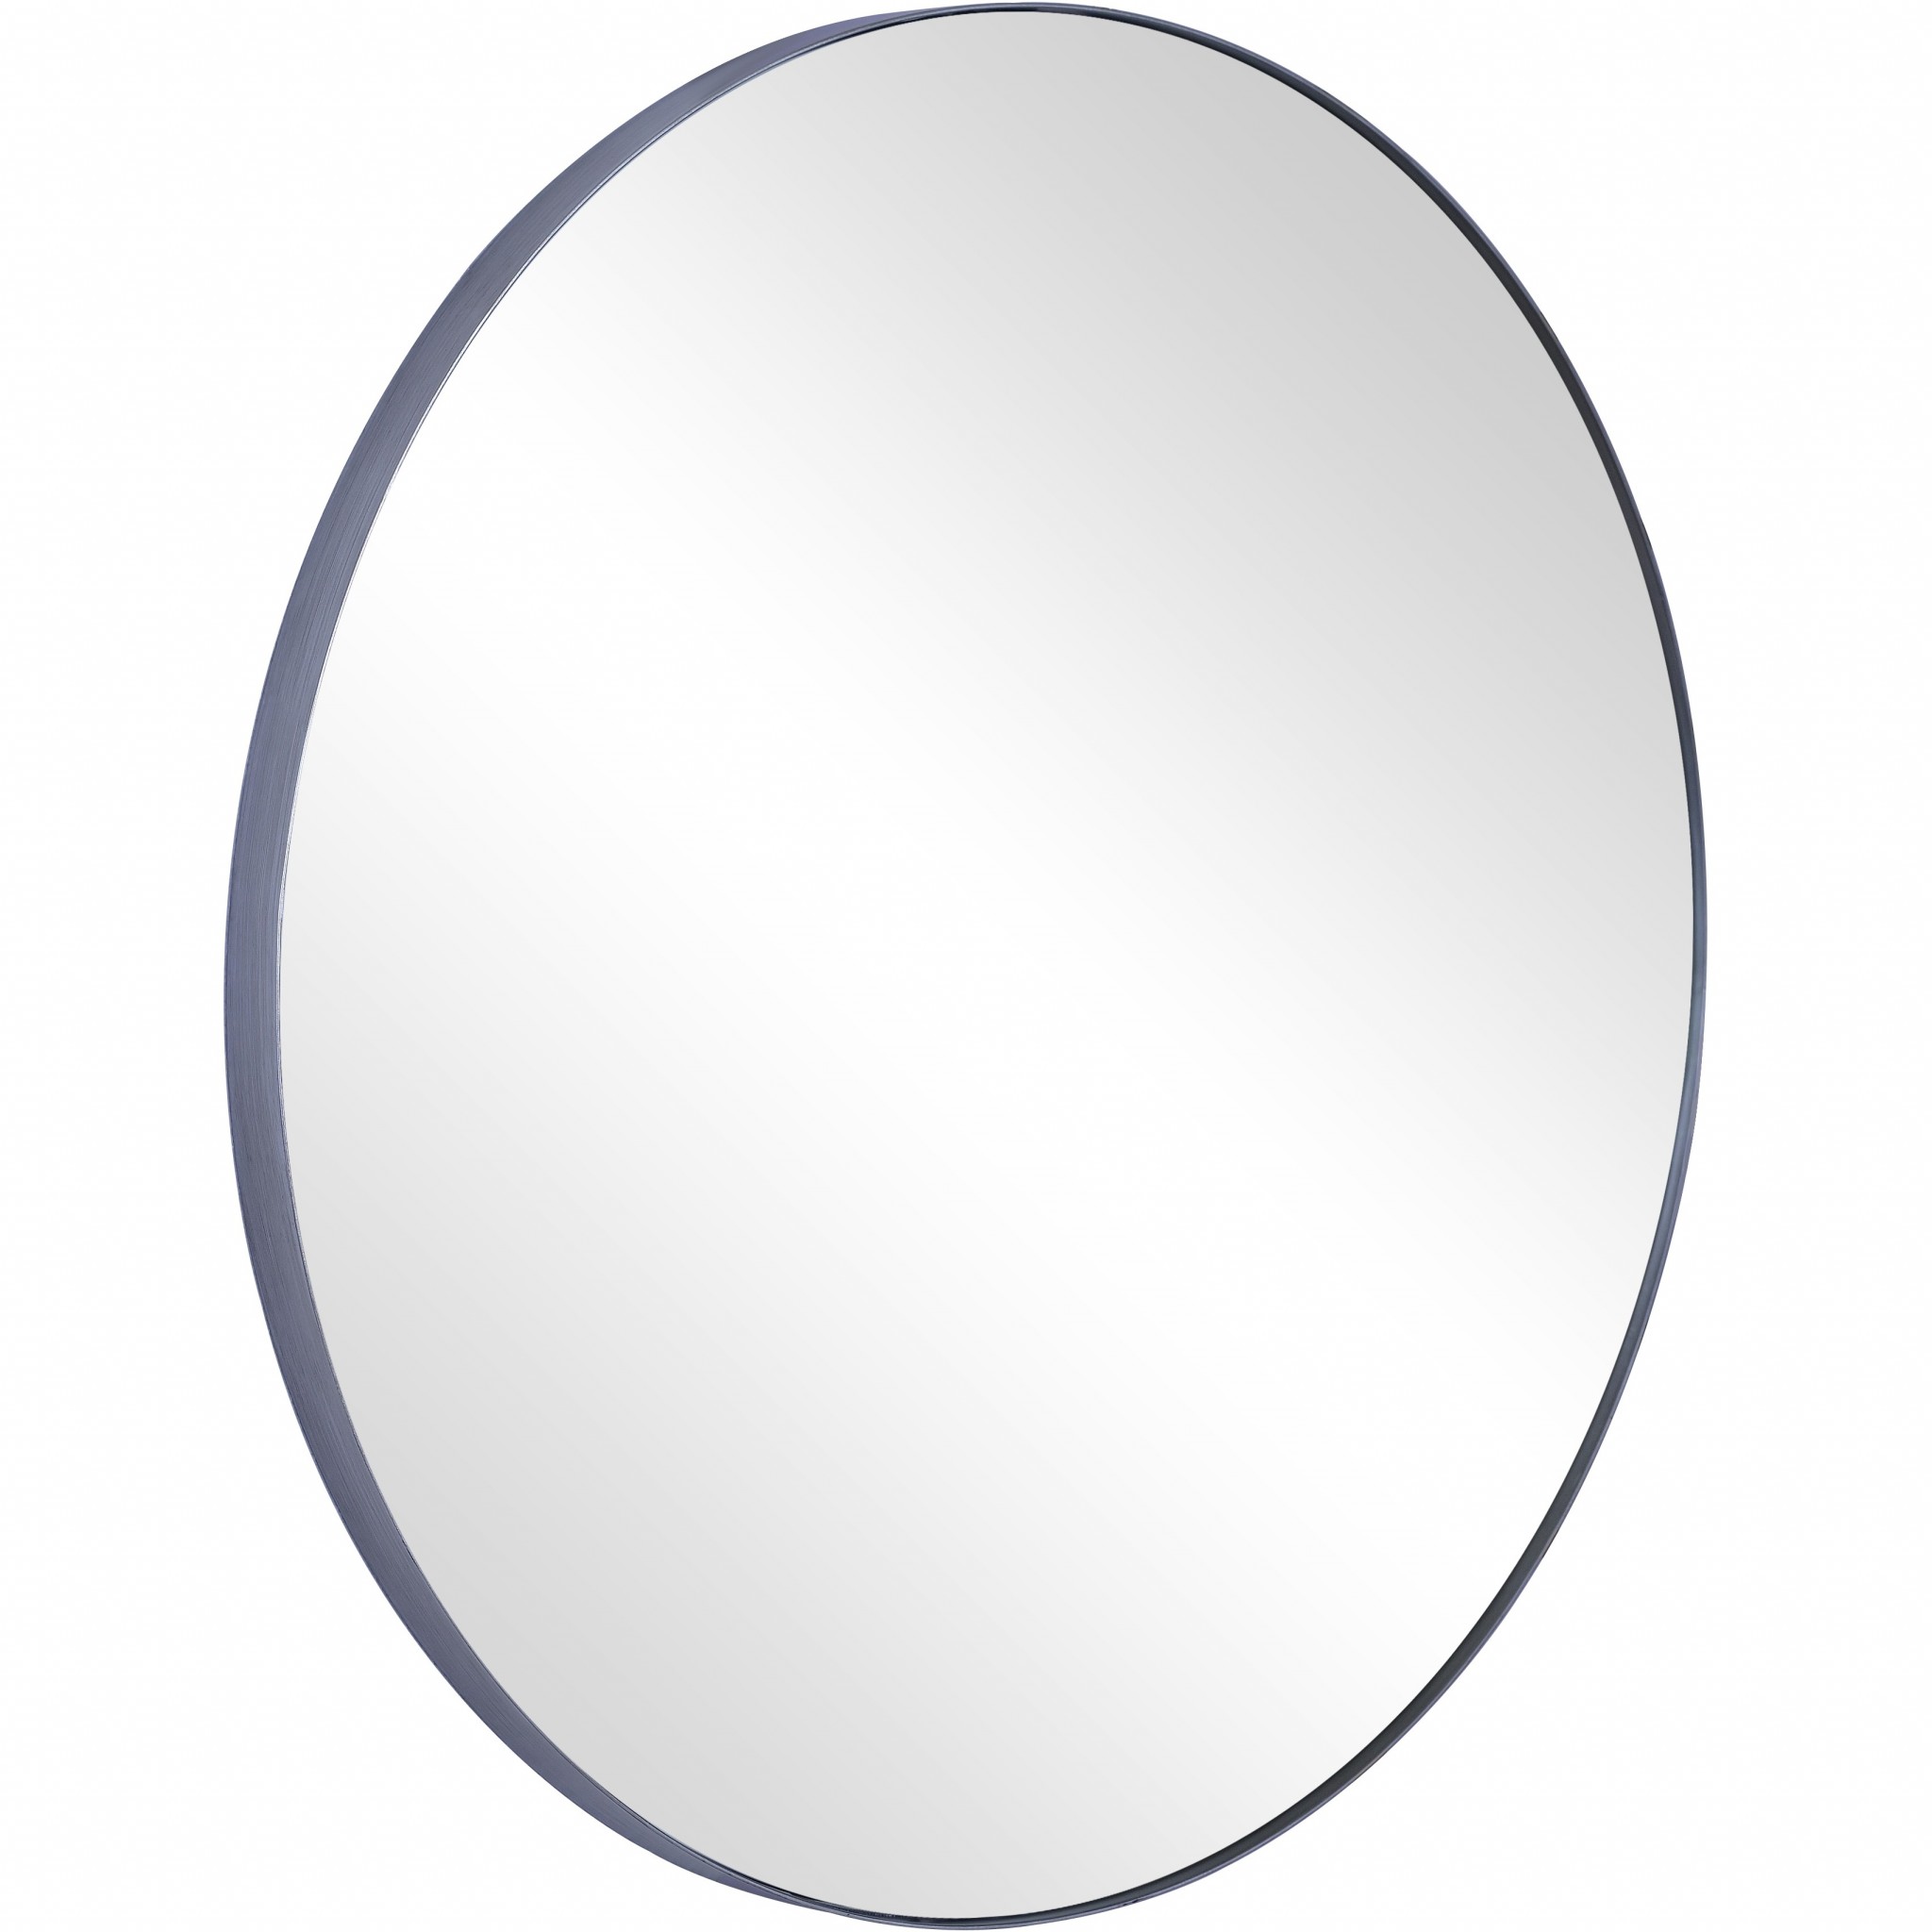 Clean and Chic Round Mirror